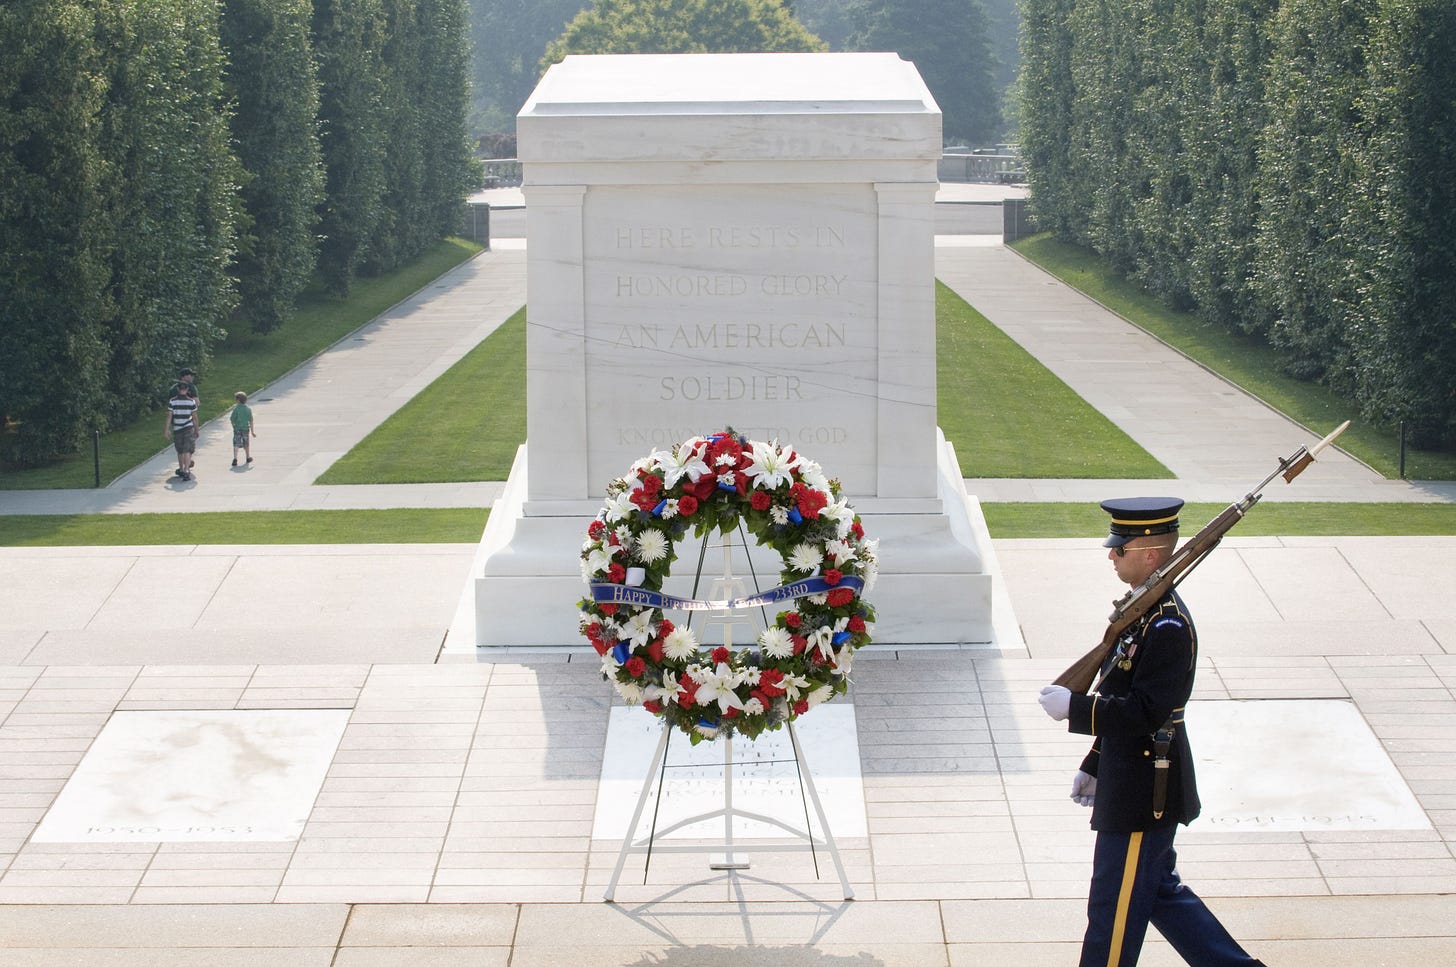 Tomb of unknown soldier, Unknown soldier, Arlington national cemetery